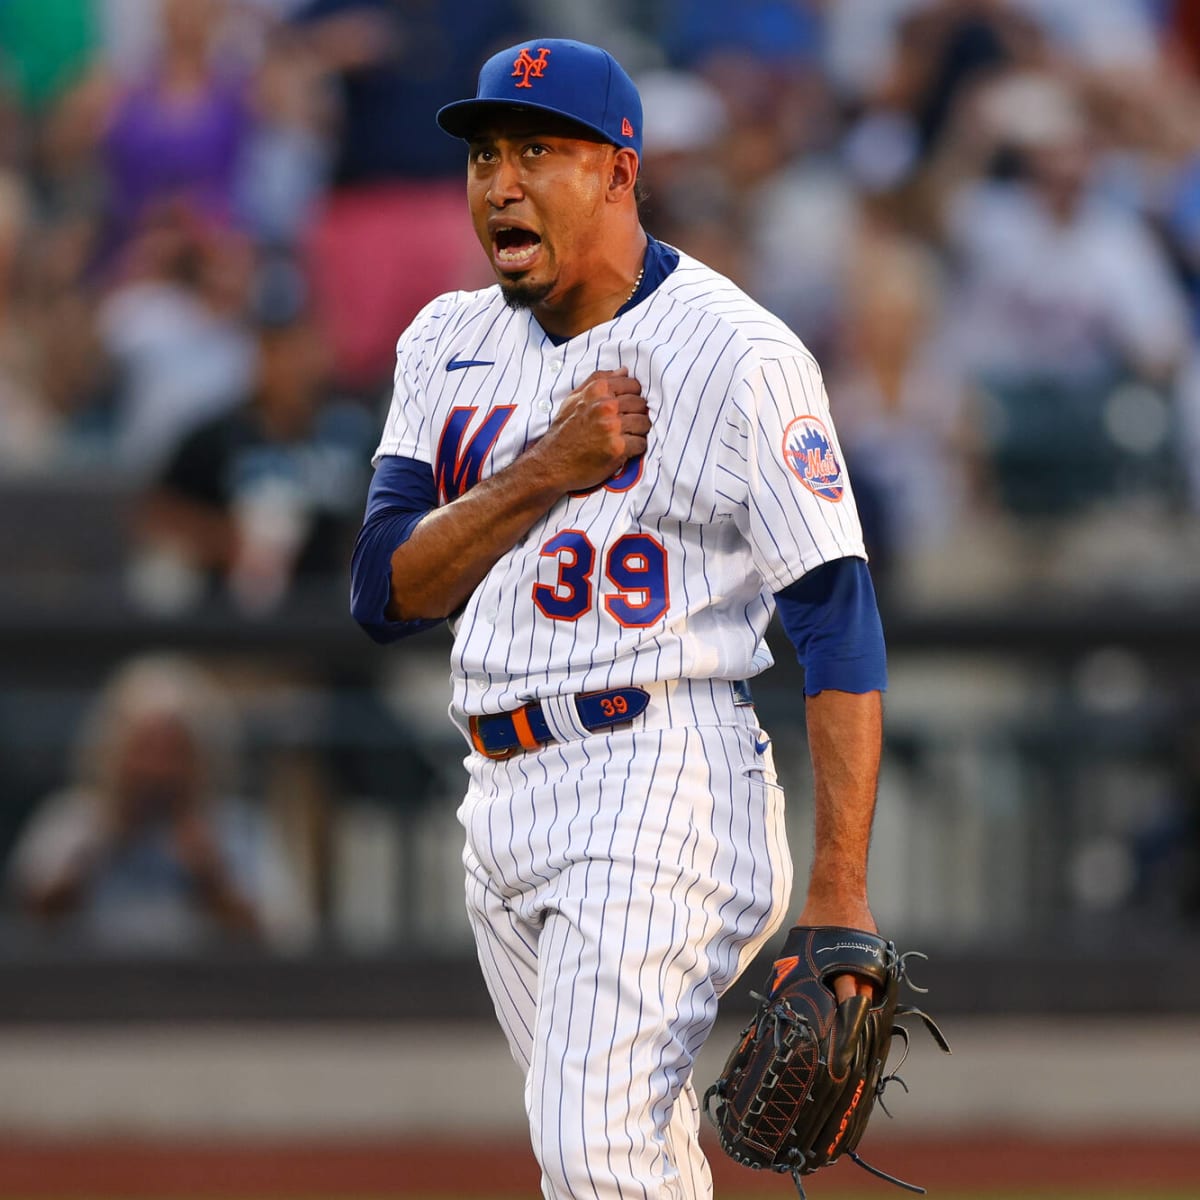 The story behind Mets closer Edwin Diaz's 'Narco' entrance